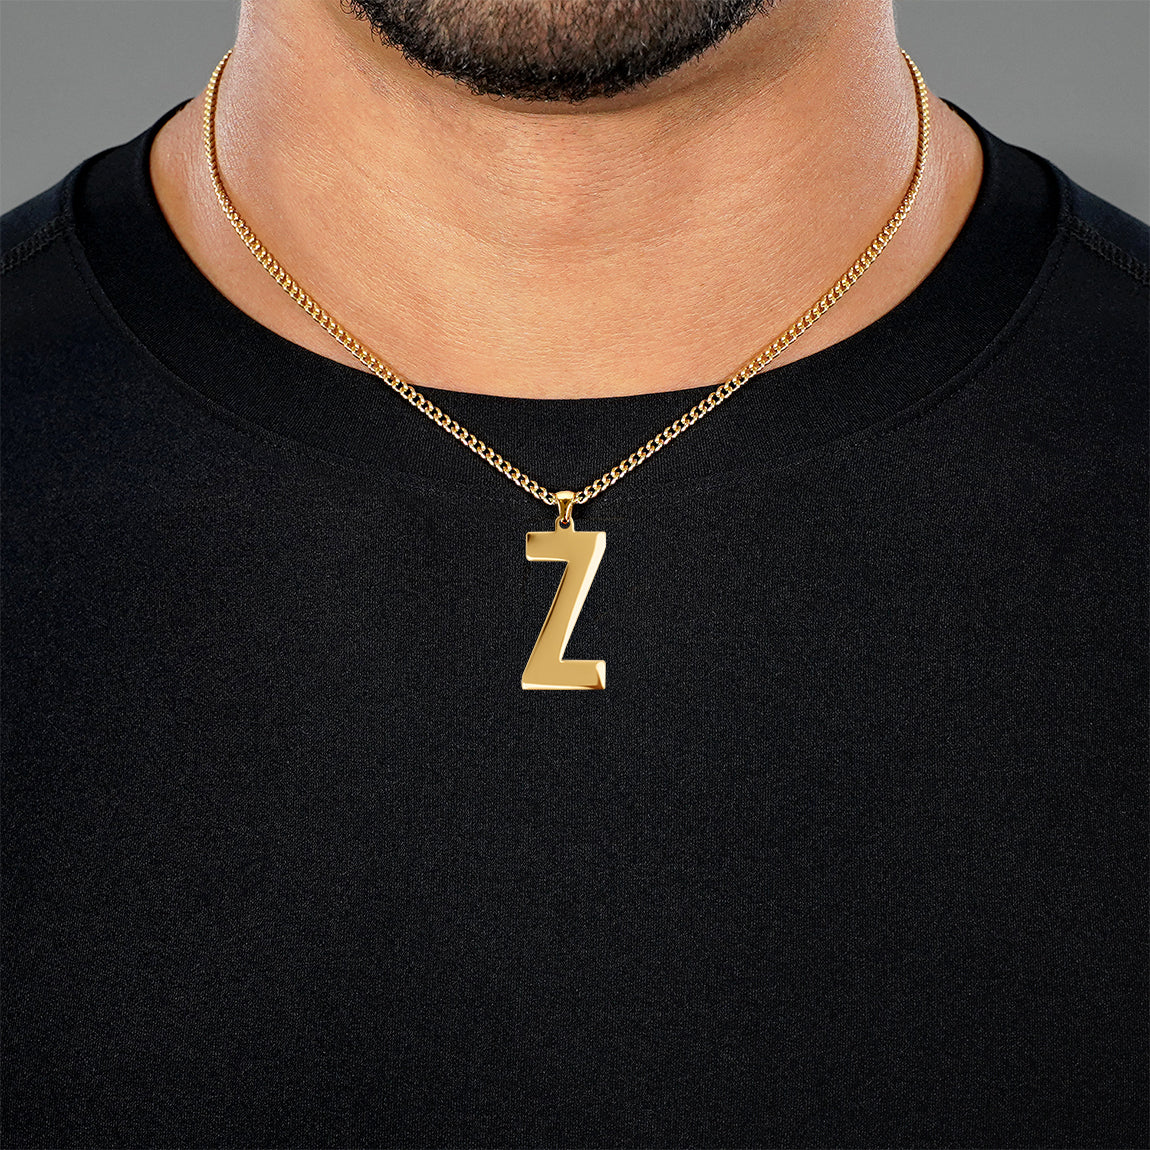 Z Letter Pendant with Chain Necklace - Gold Plated Stainless Steel